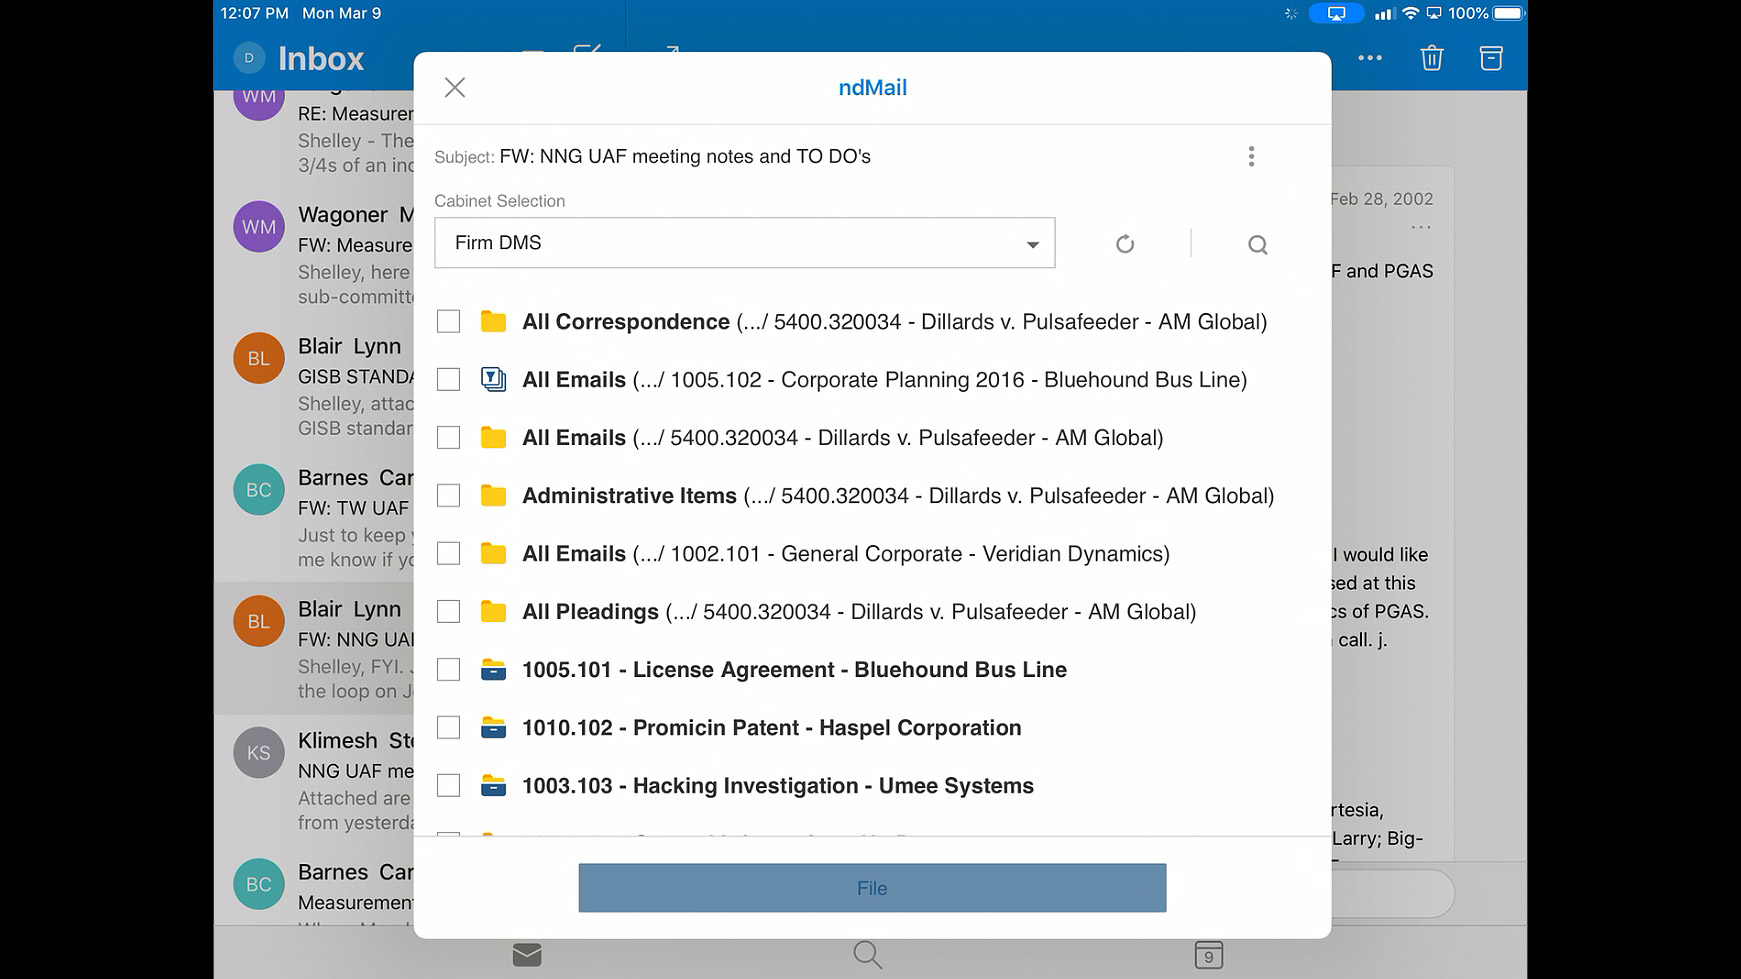 The NetDocuments platform is designed to work anywhere, on any device which means you can file emails on the go from your phone or tablet.